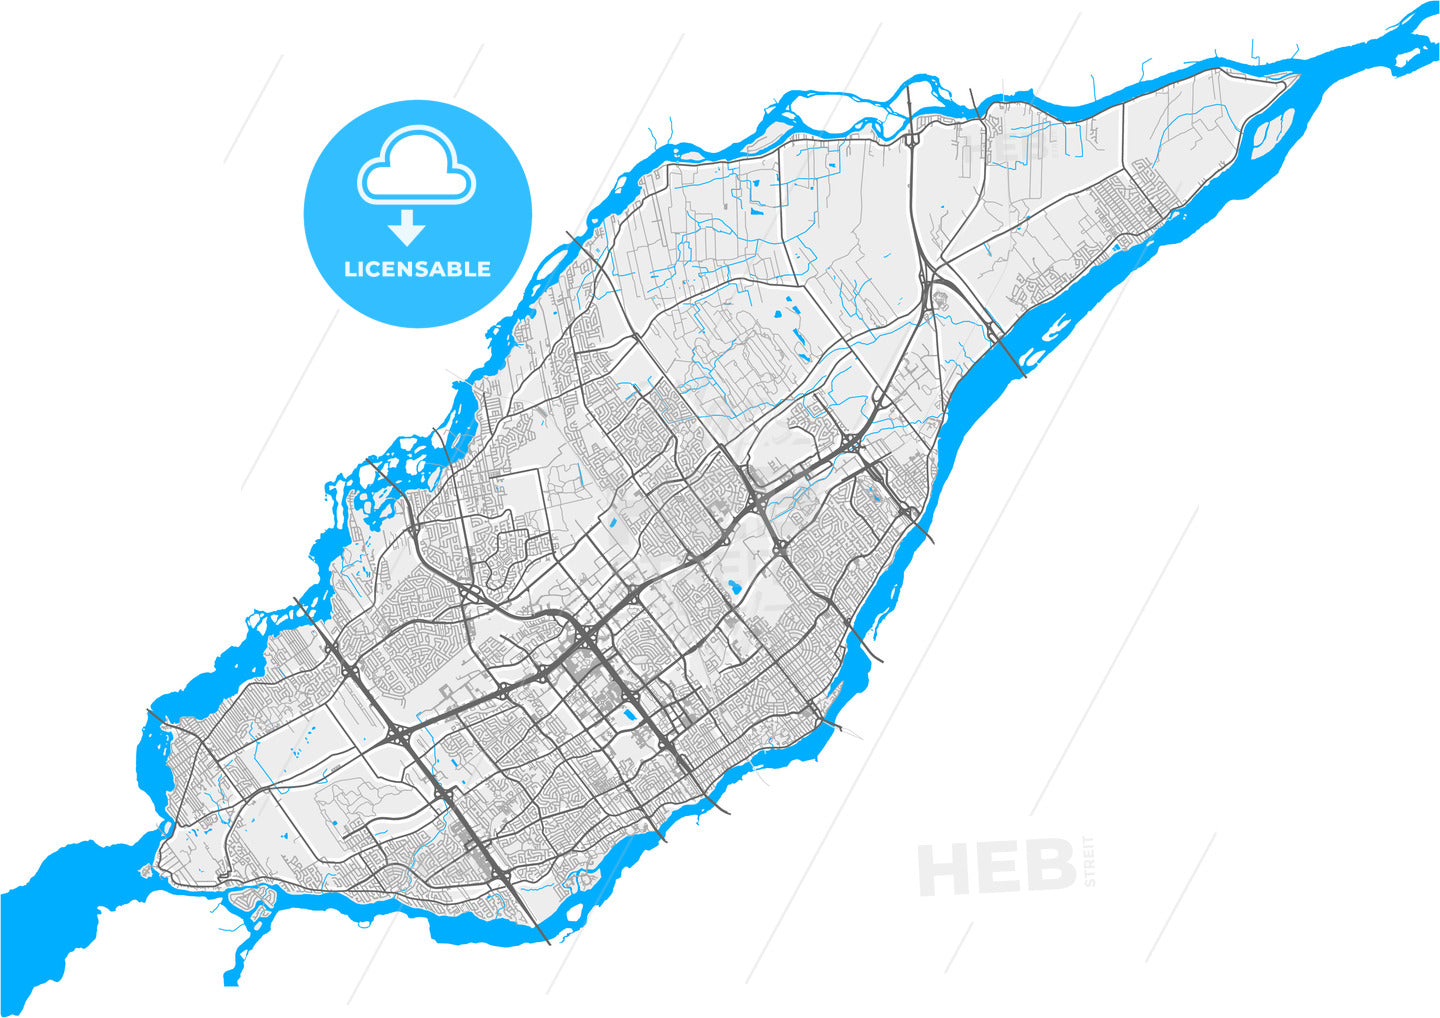 Laval, Quebec, Canada, high quality vector map